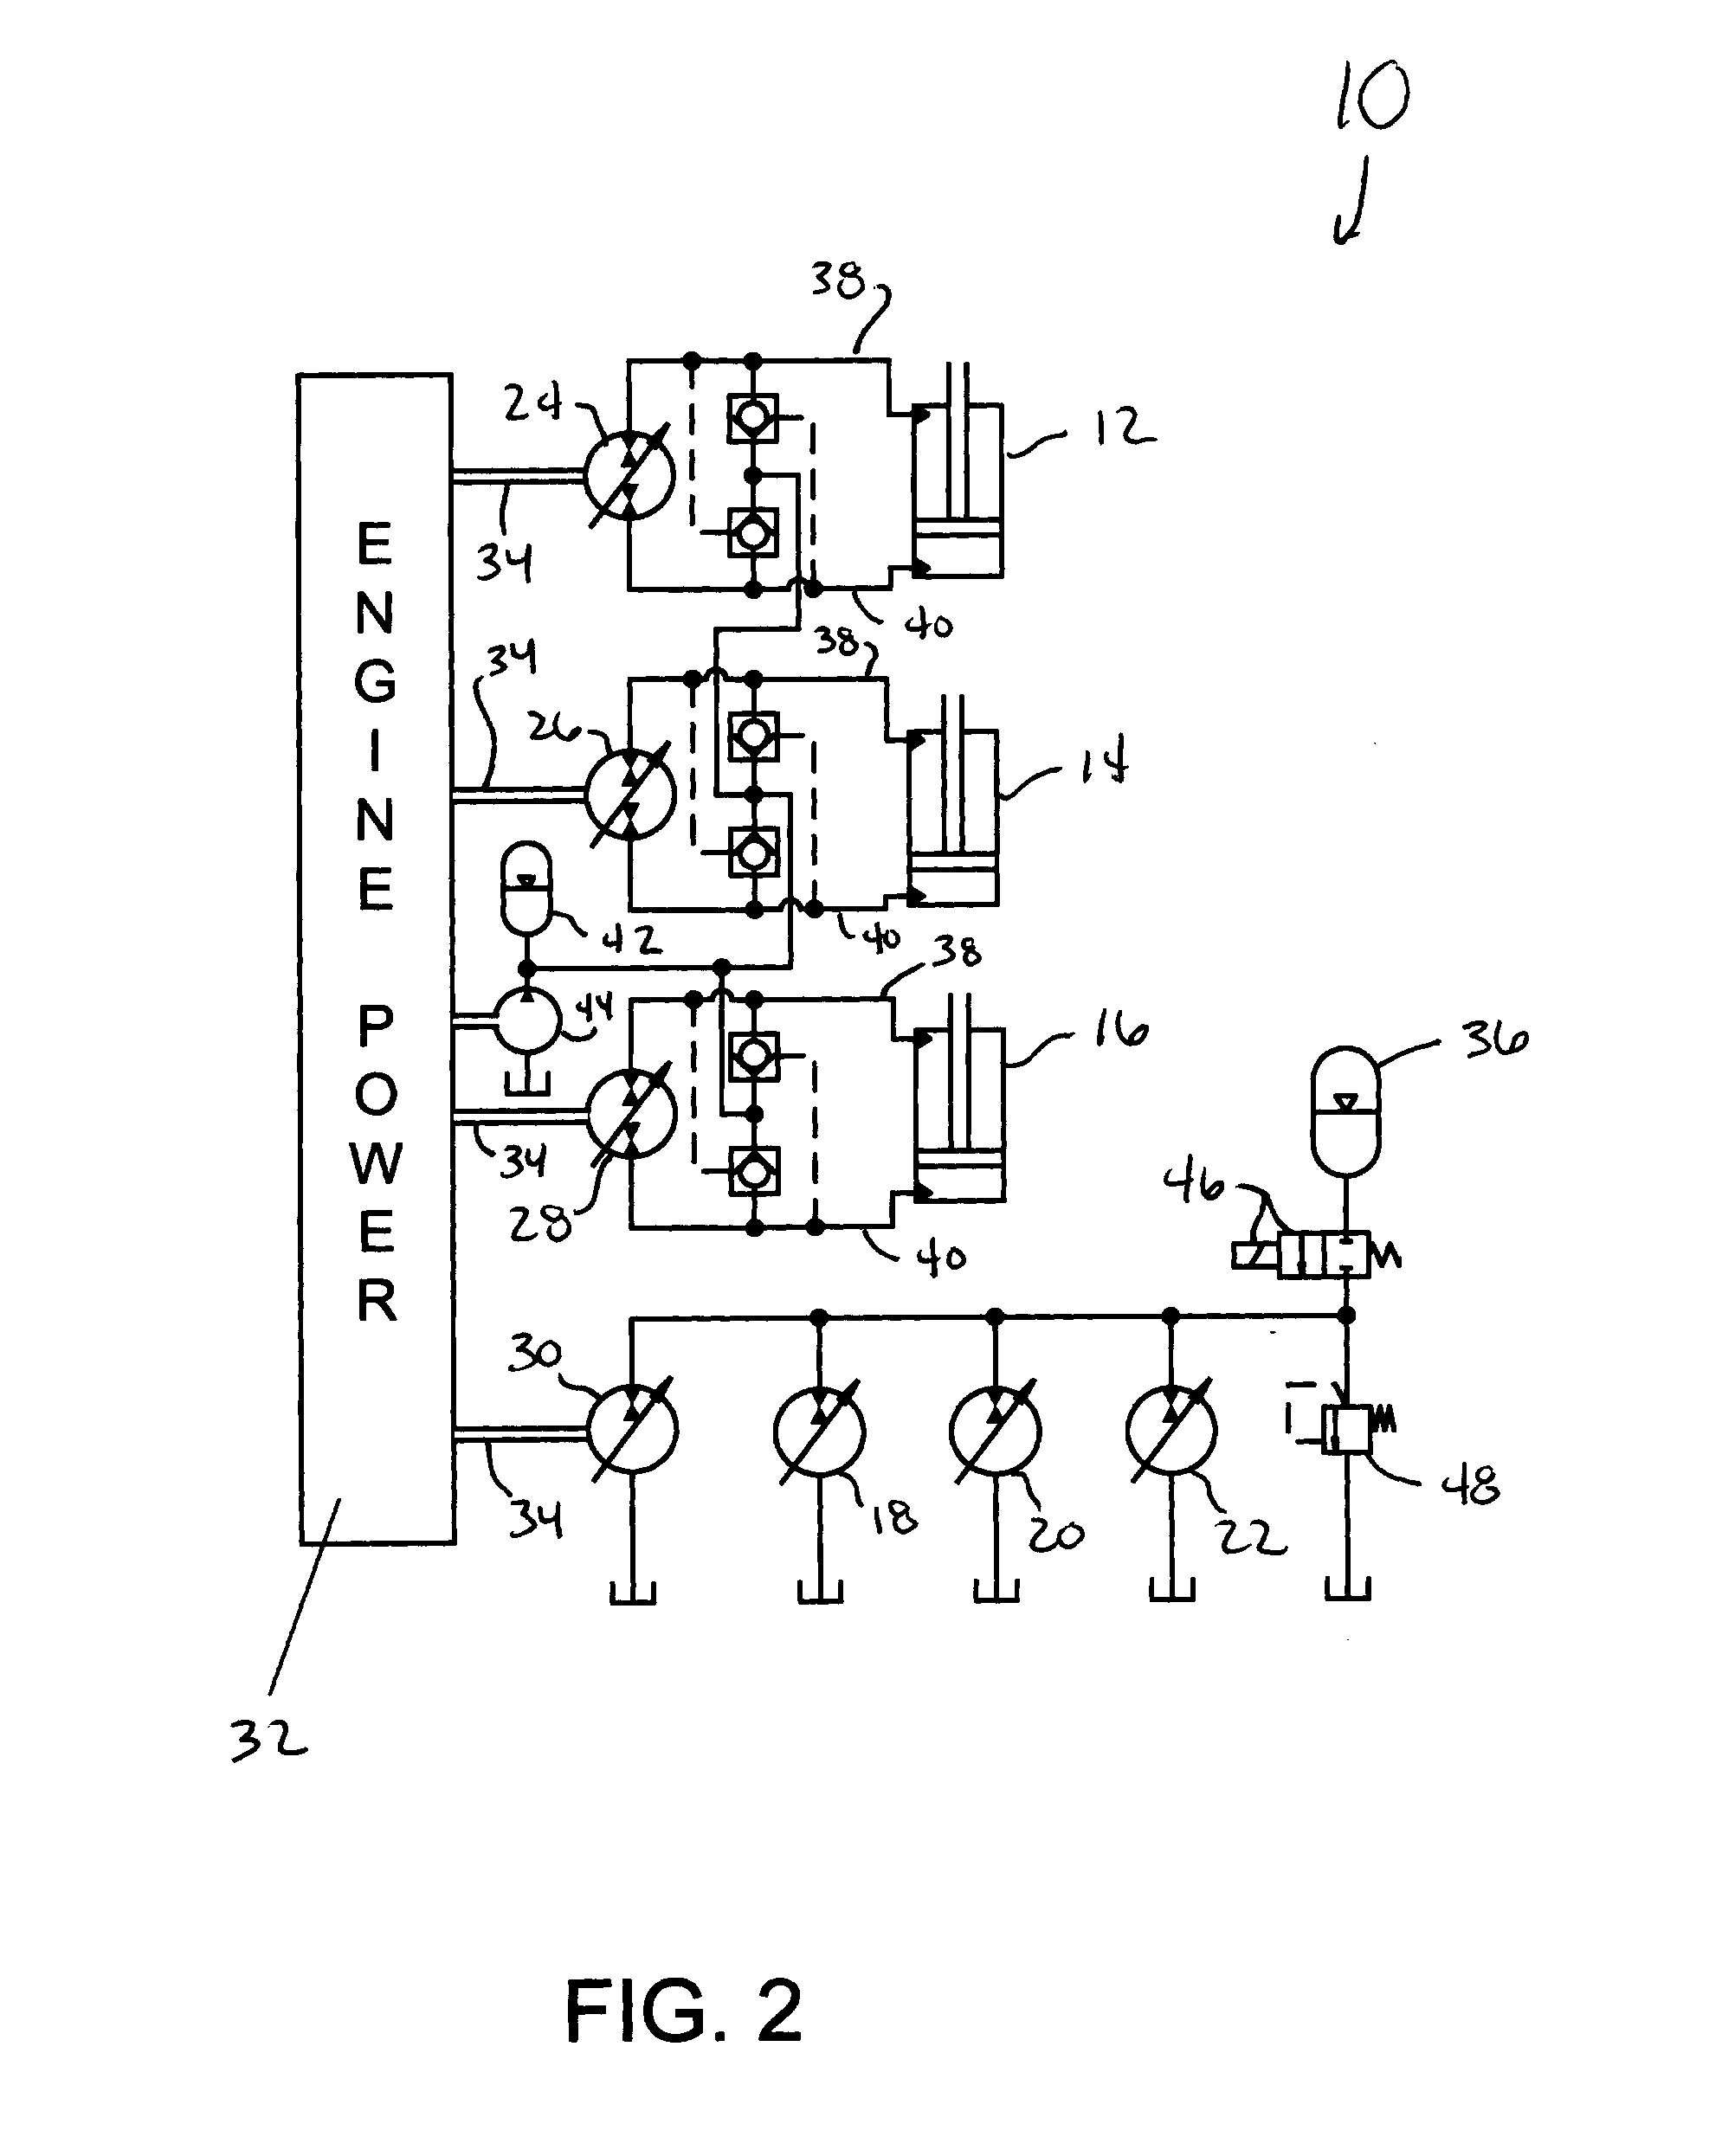 Multi-function machines, hydraulic systems therefor, and methods for their operation